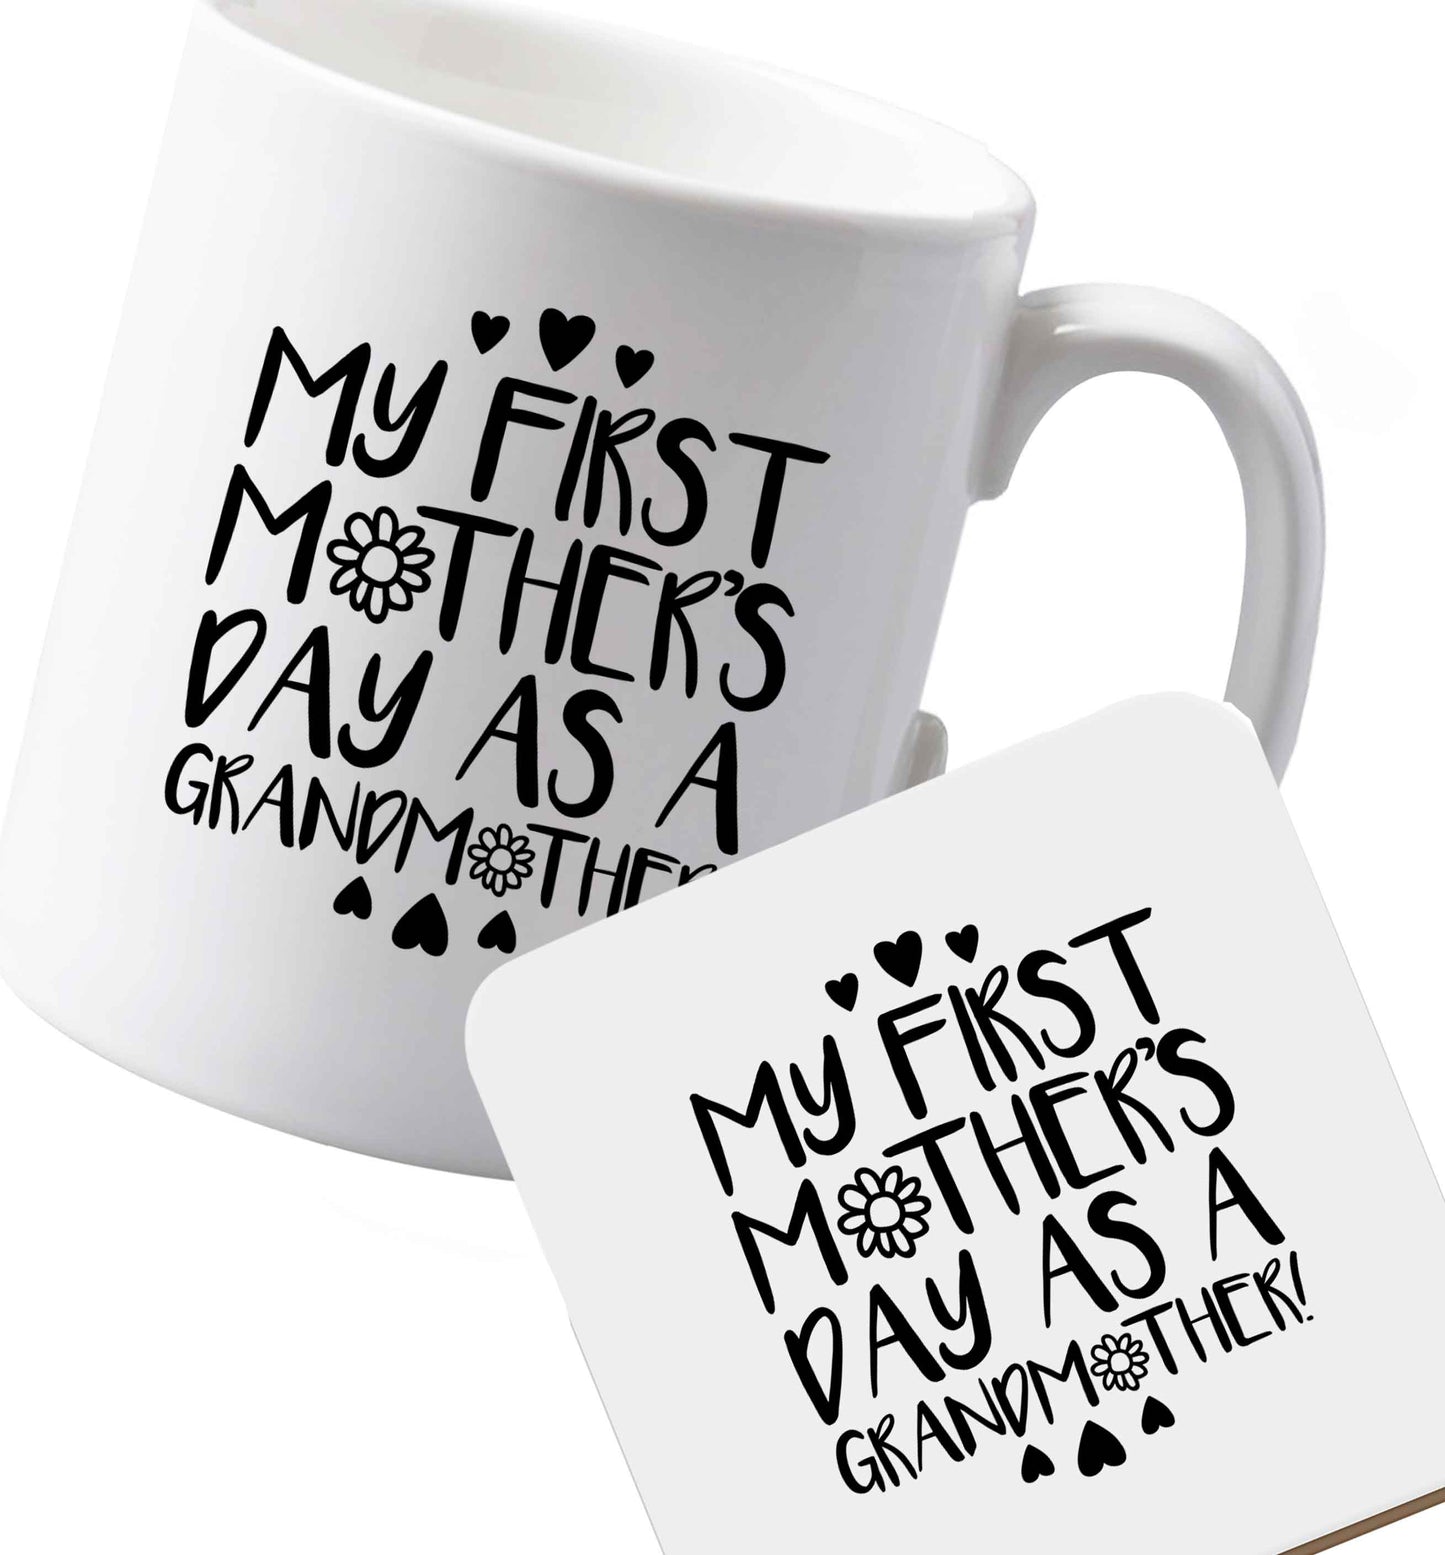 10 oz Ceramic mug and coaster It's my first mother's day as a grandmother both sides